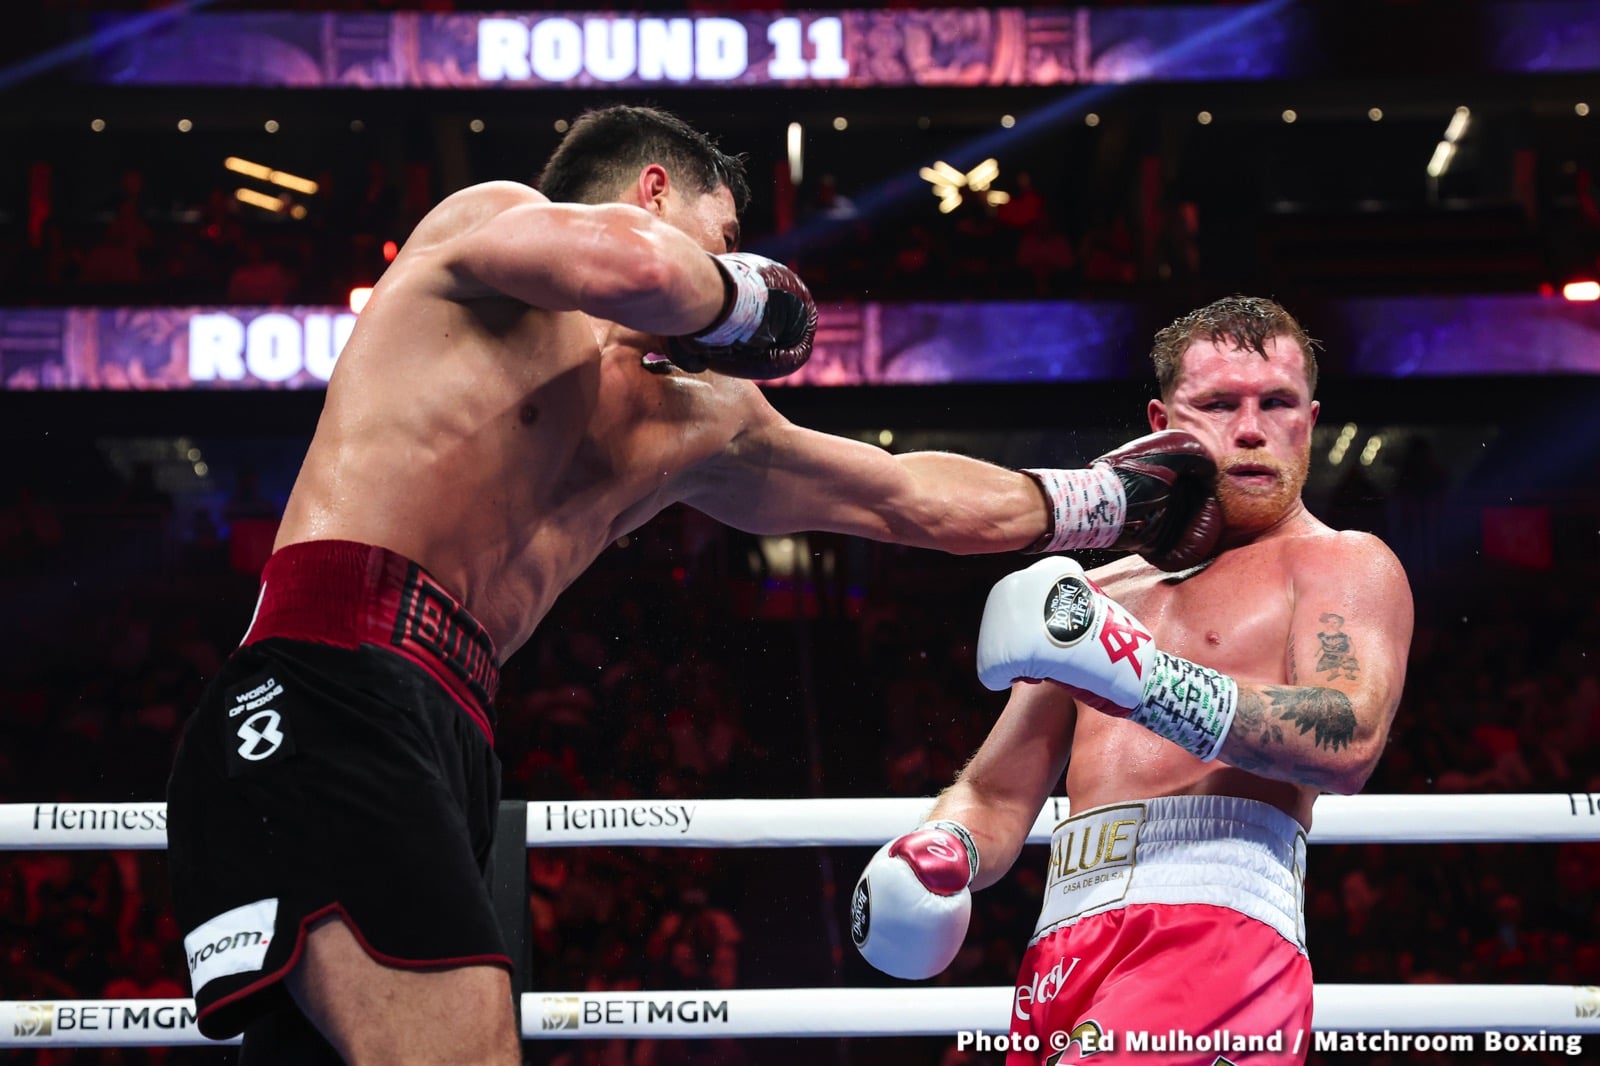 Image: 4th annual Boxingnews24 Top to Bottom Review